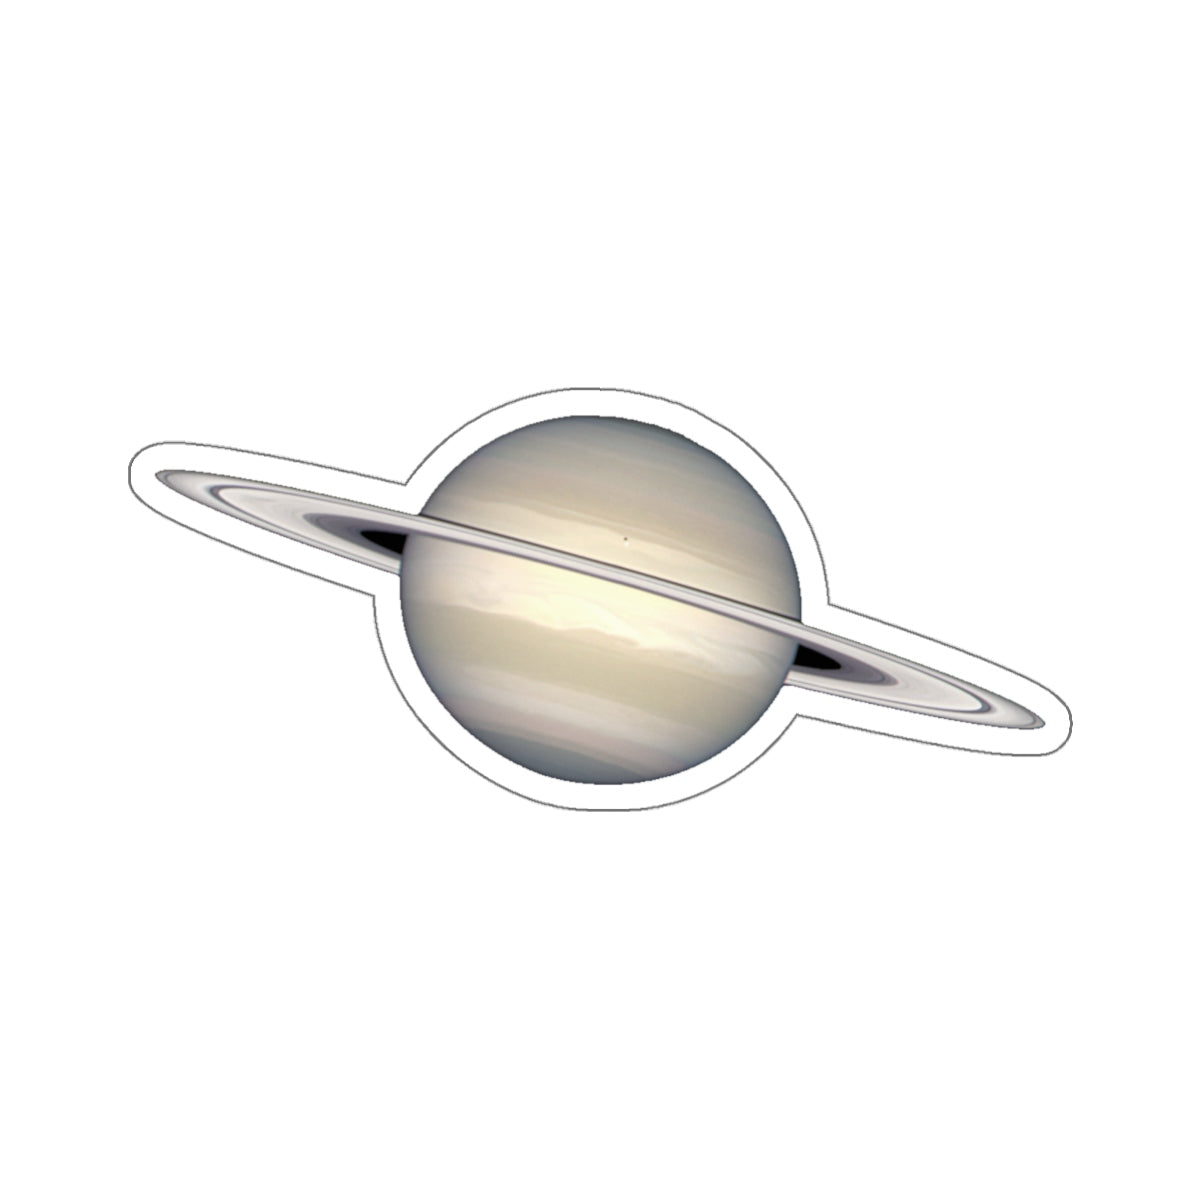 Saturn Decal, Planet Space Stickers Laptop Vinyl Waterproof Waterbottle Car Bumper Aesthetic Label Wall Phone Mural Decal Die Cut Starcove Fashion